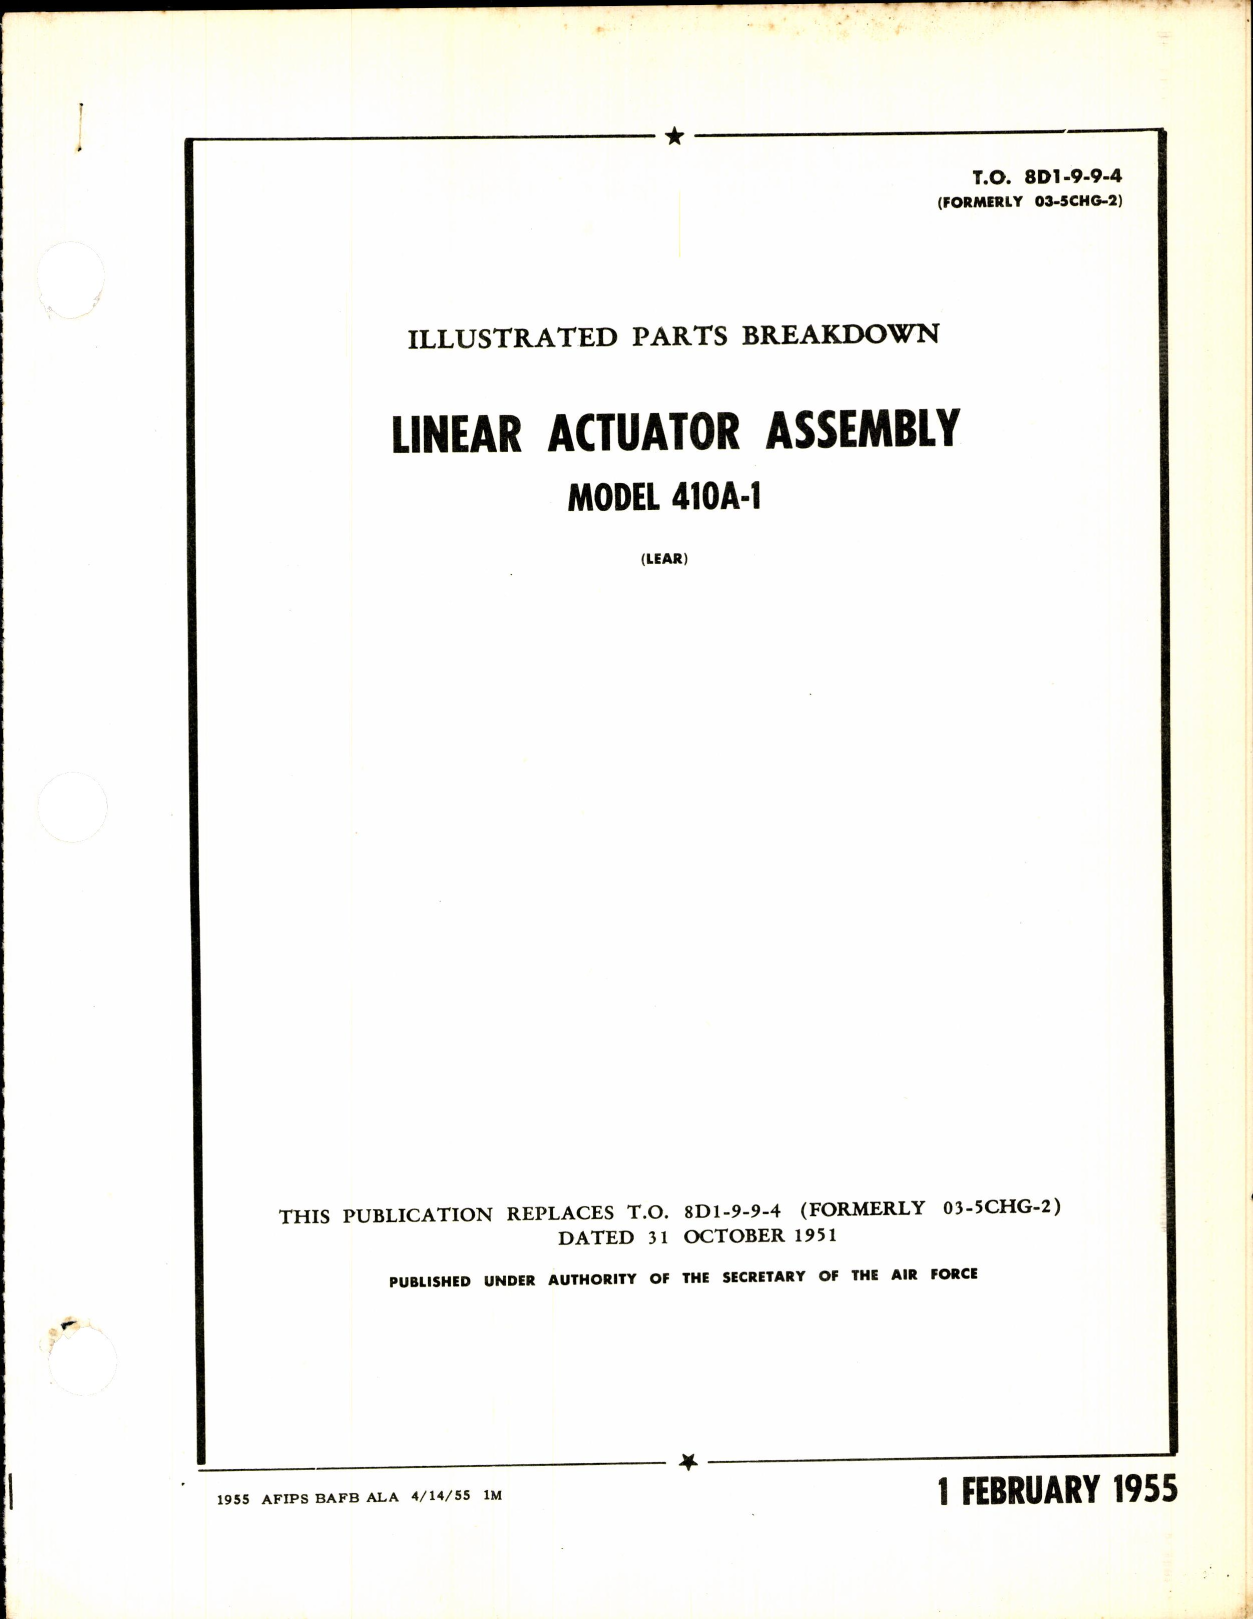 Sample page 1 from AirCorps Library document: Parts Breakdown for LInear Actuator Assembly Model 410A-1